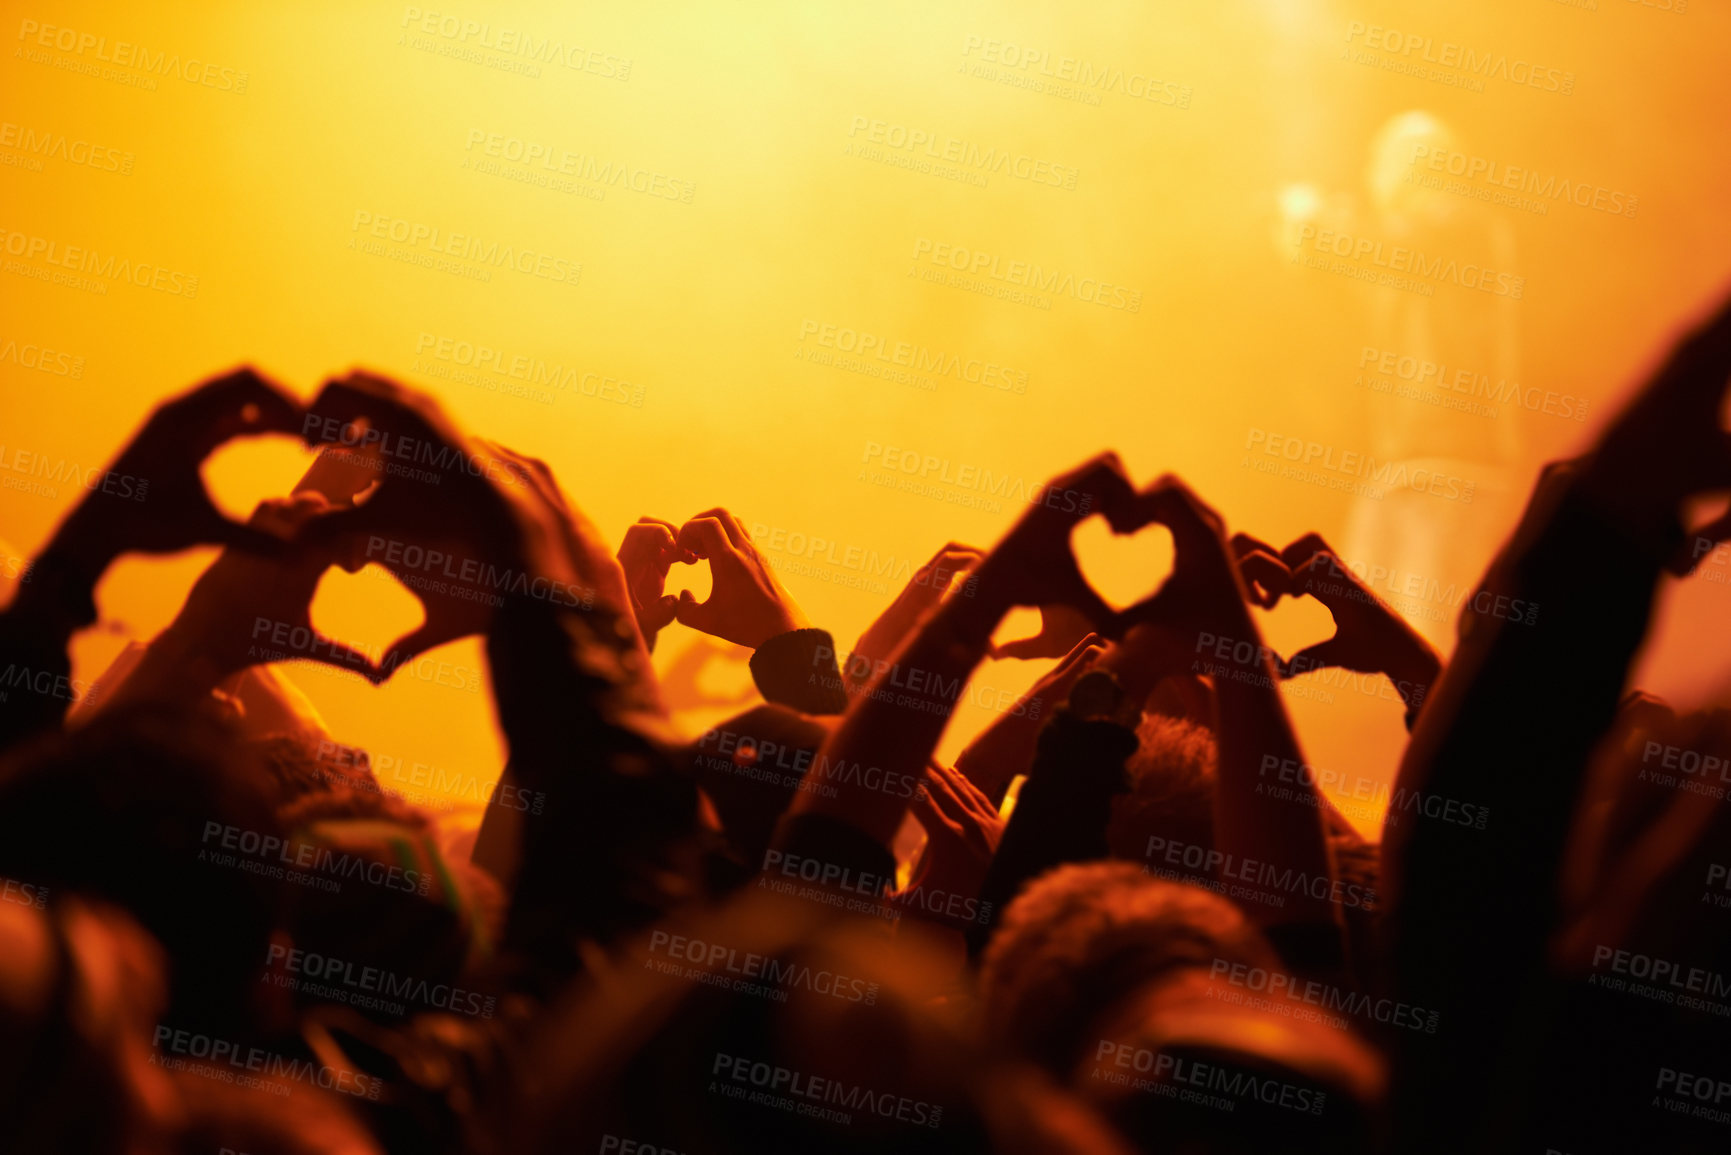 Buy stock photo Rear view of an audience making heart-shapes with their hands